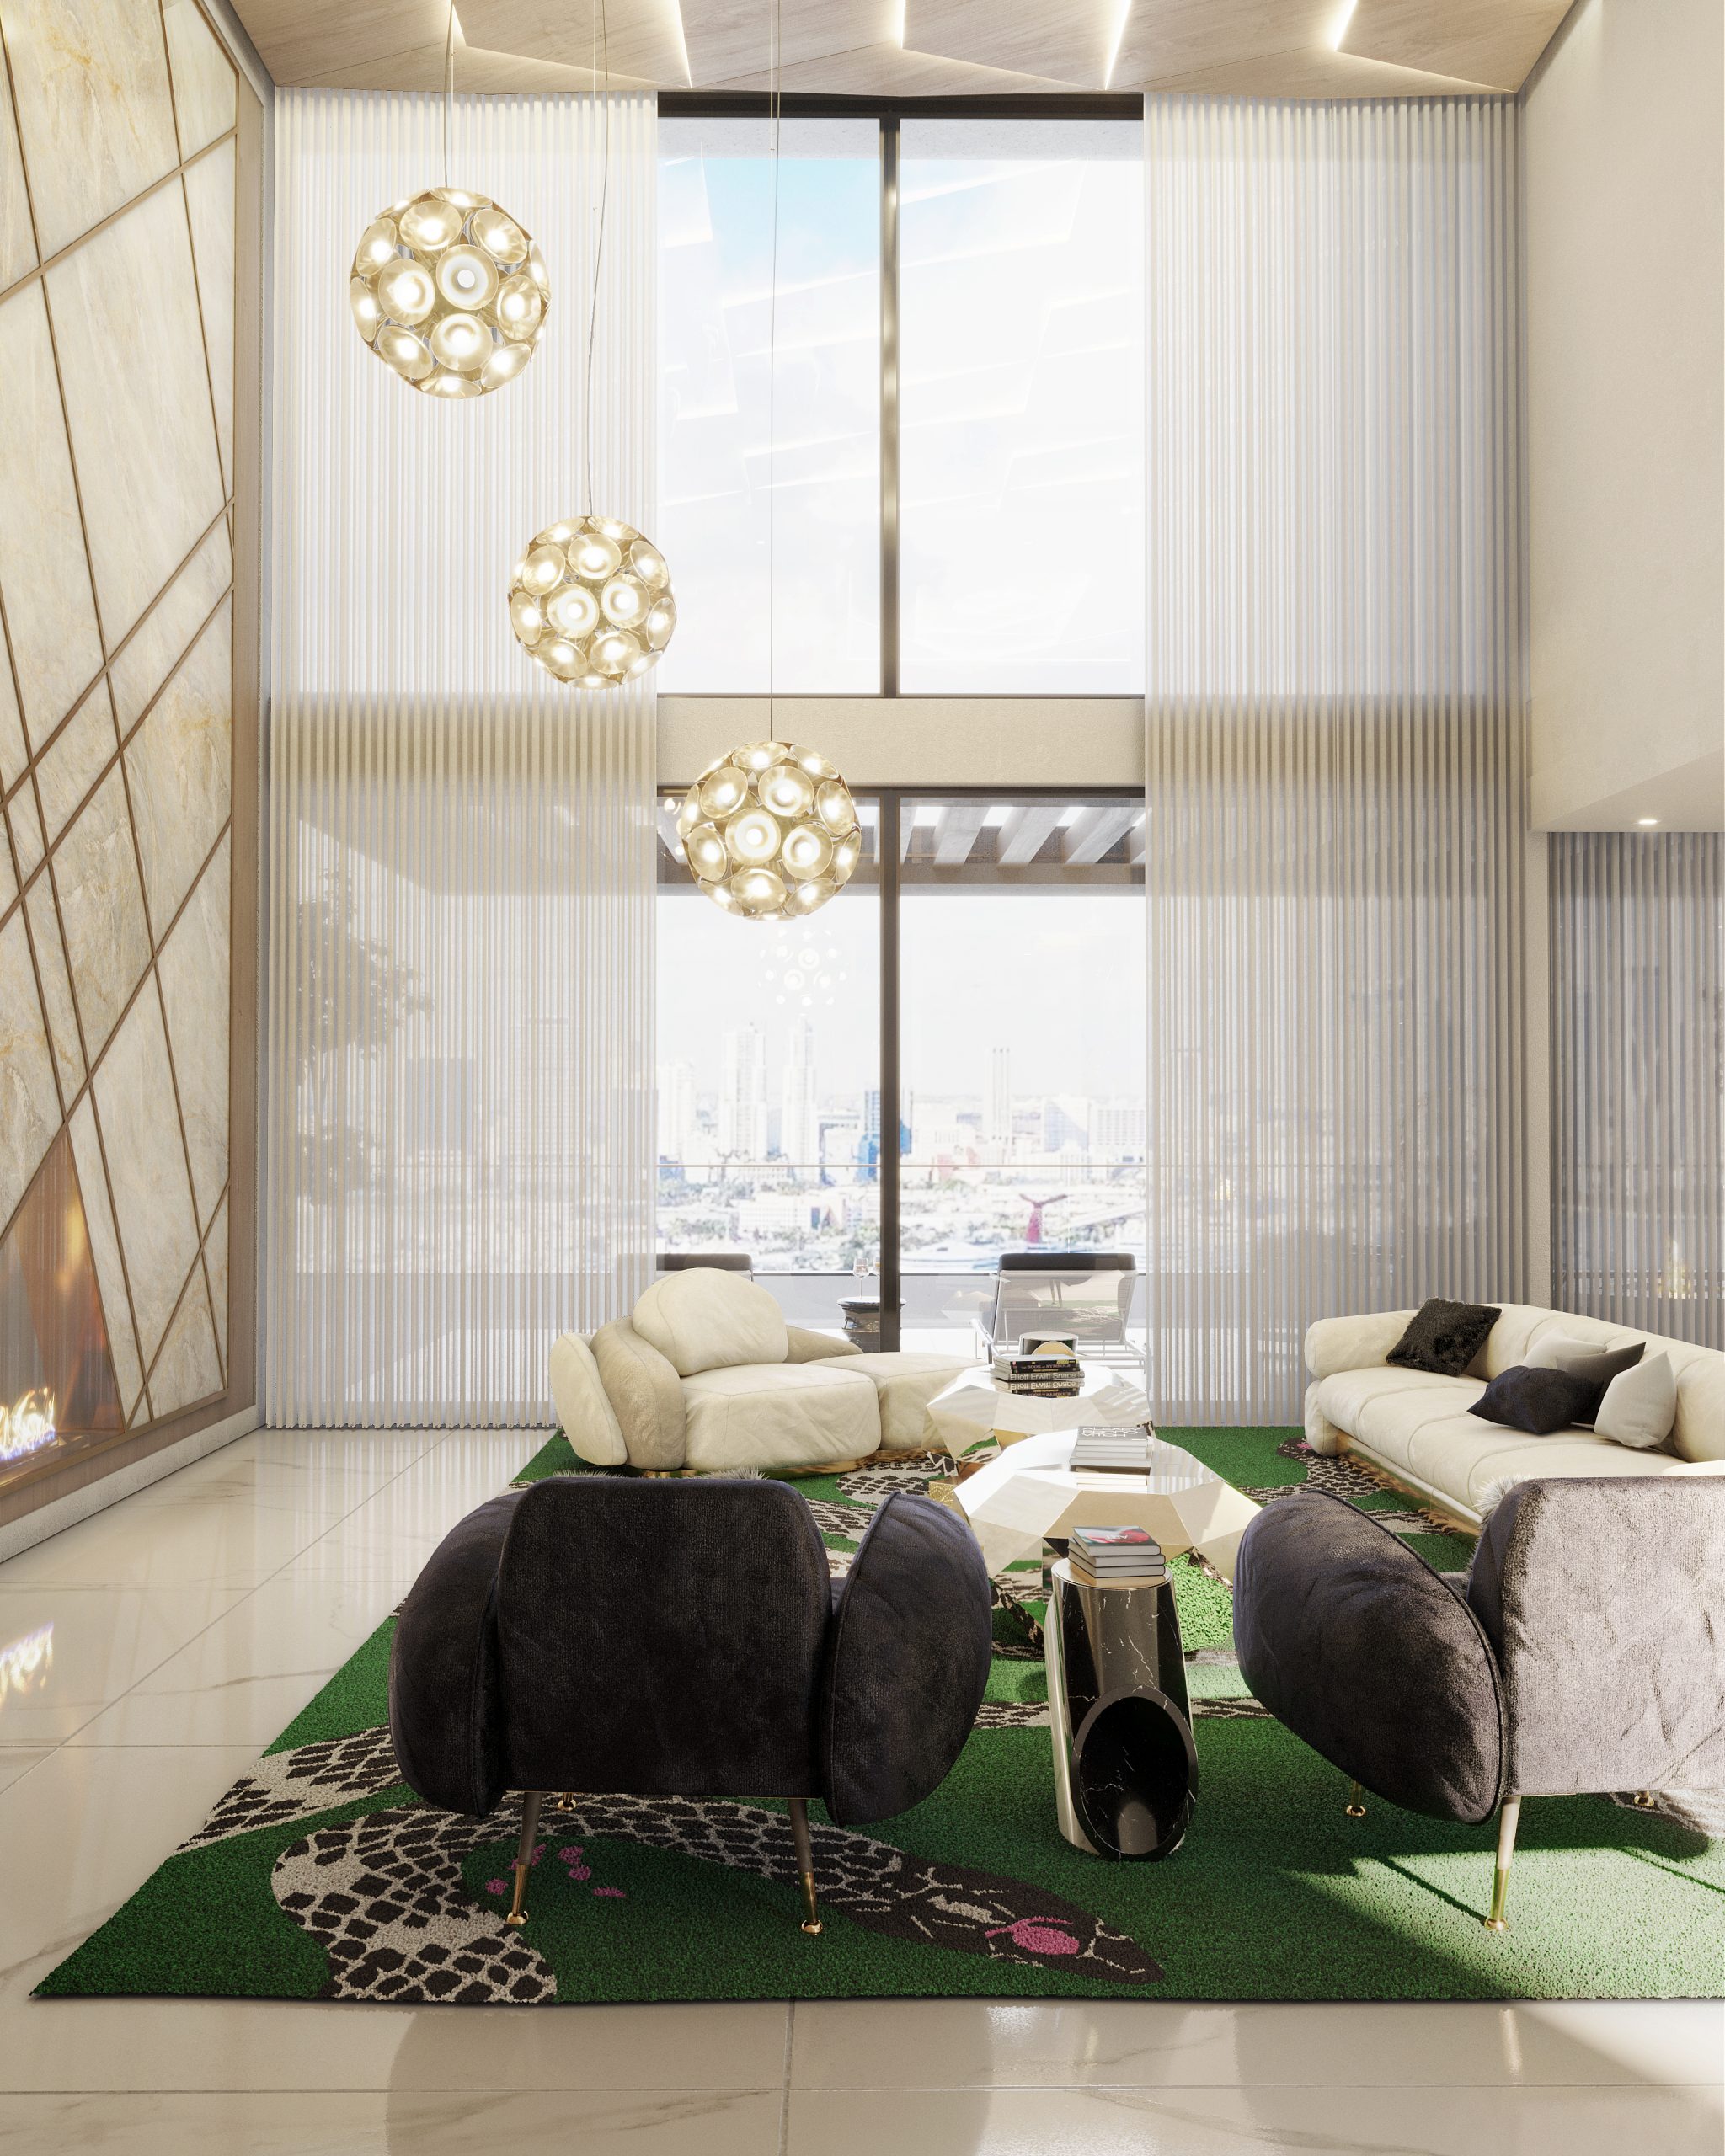 Shop The Look: Discover How You Can Pull Off The Glamorous Living Room of Pepe Calderin’s Penthouse in Miami